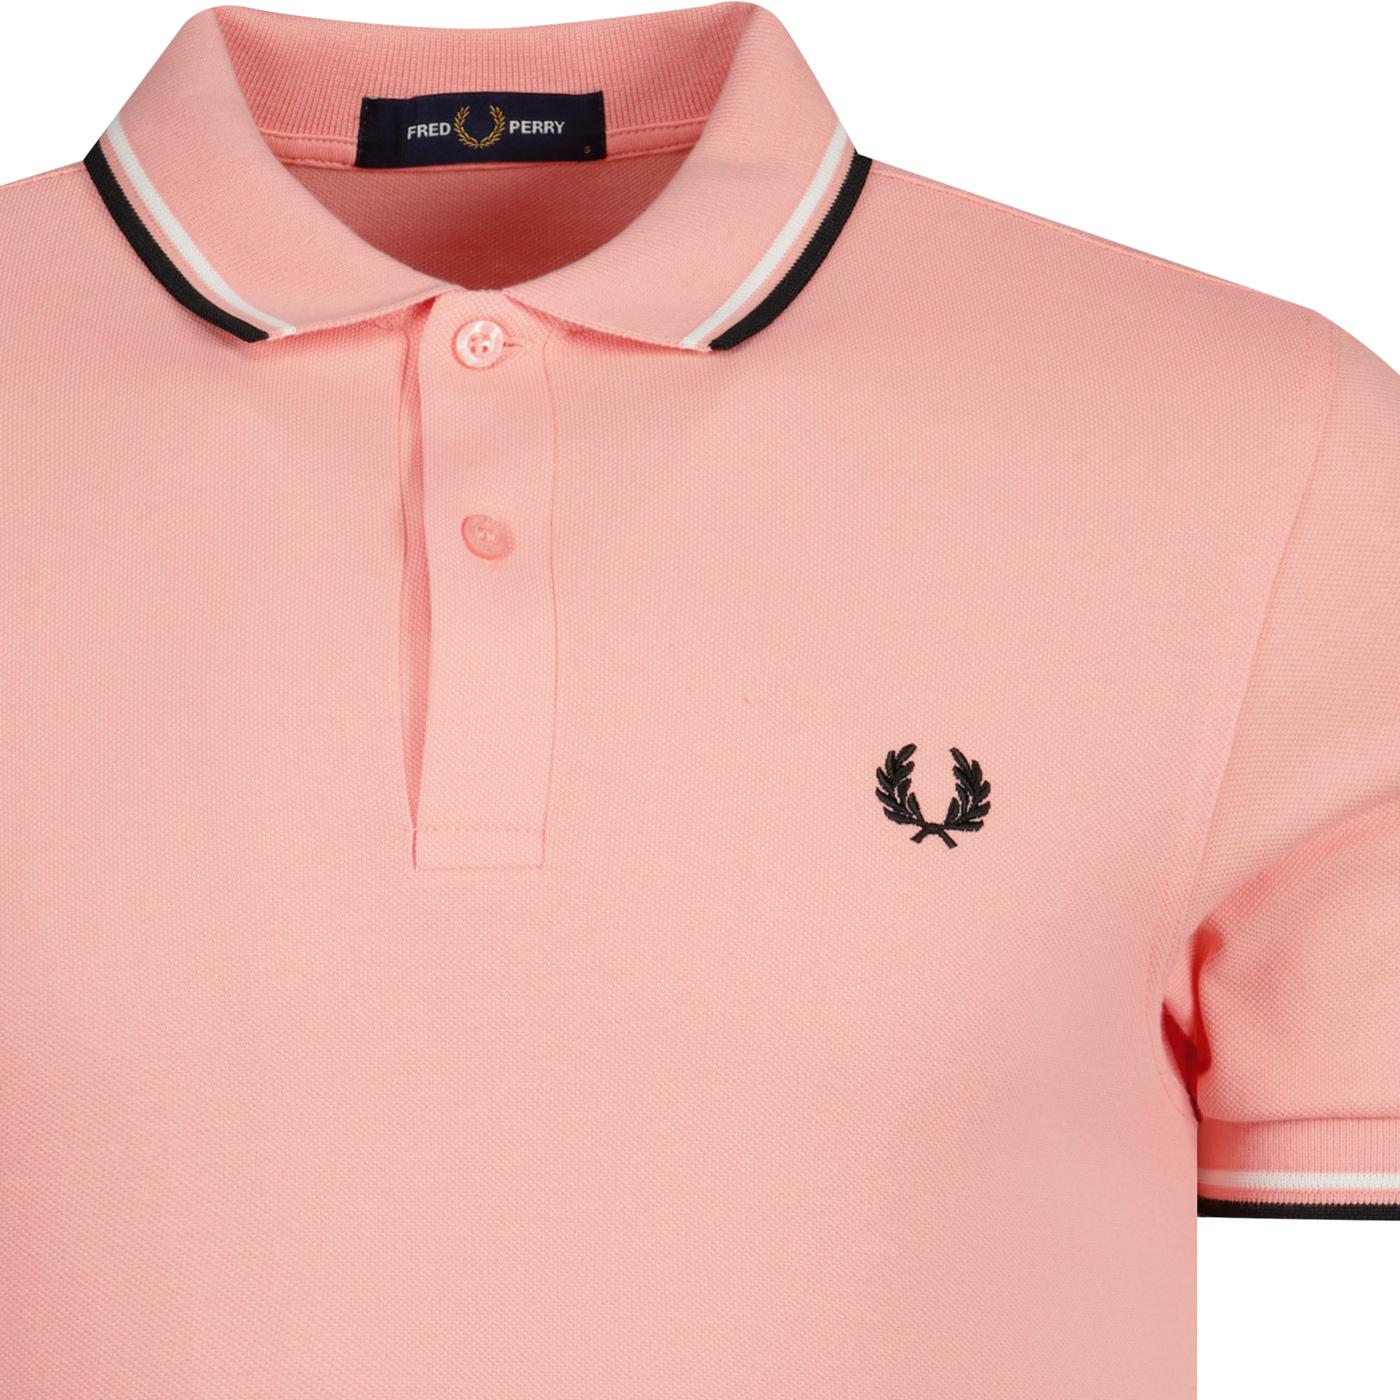 FRED PERRY M3600 Twin Tipped Mod Polo Top in Pink Peach